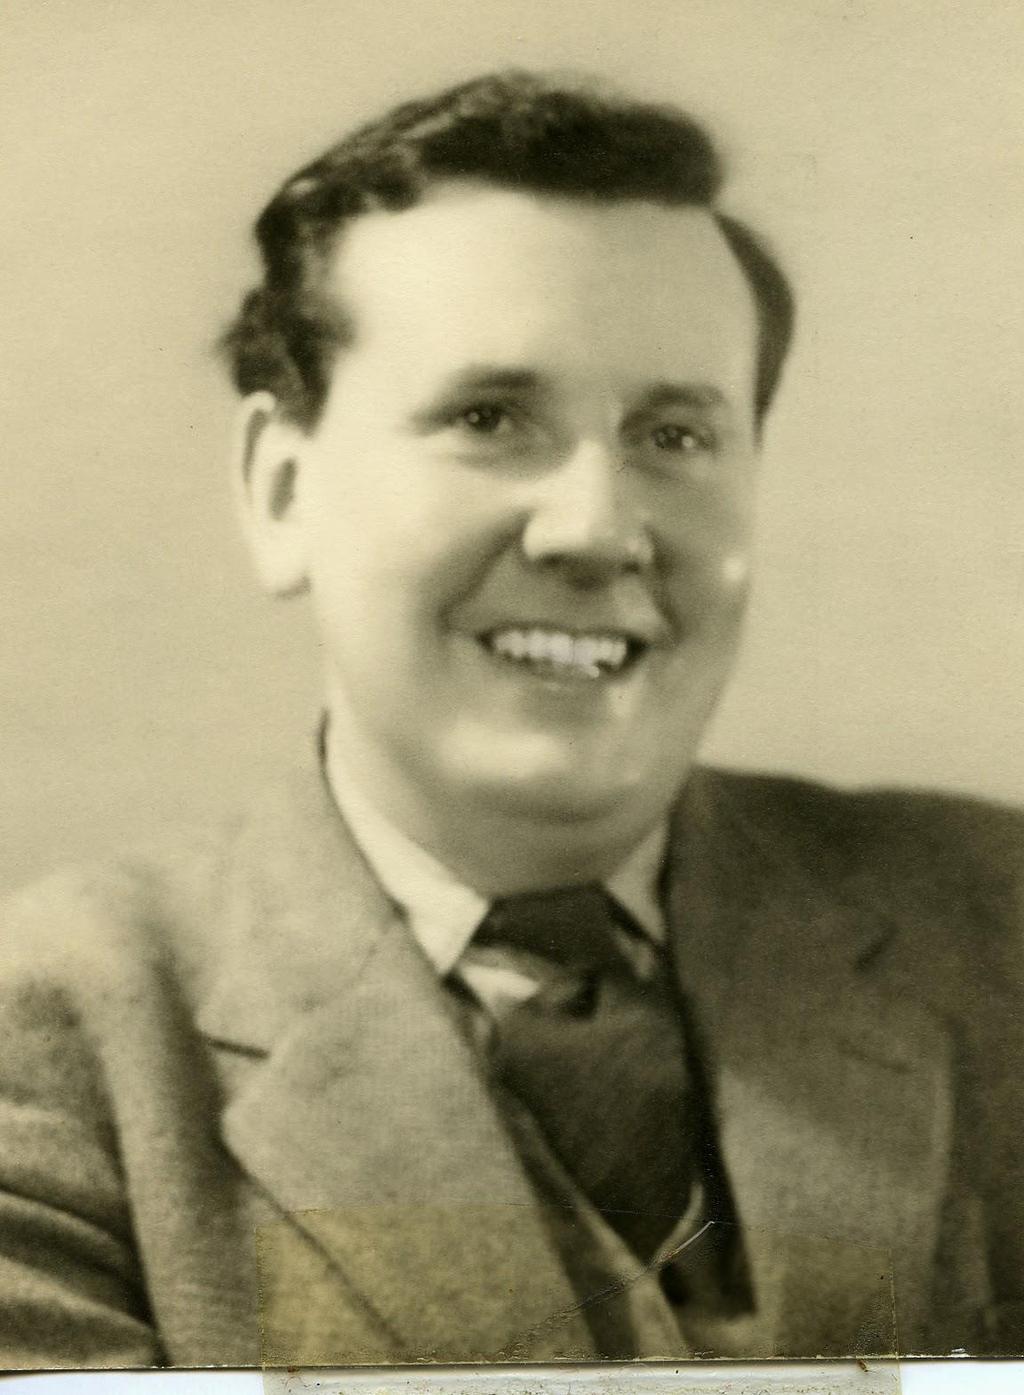 Sir Malcolm Henry Arnold Malcolm Arnold was born October 21st, 1921 in Northampton